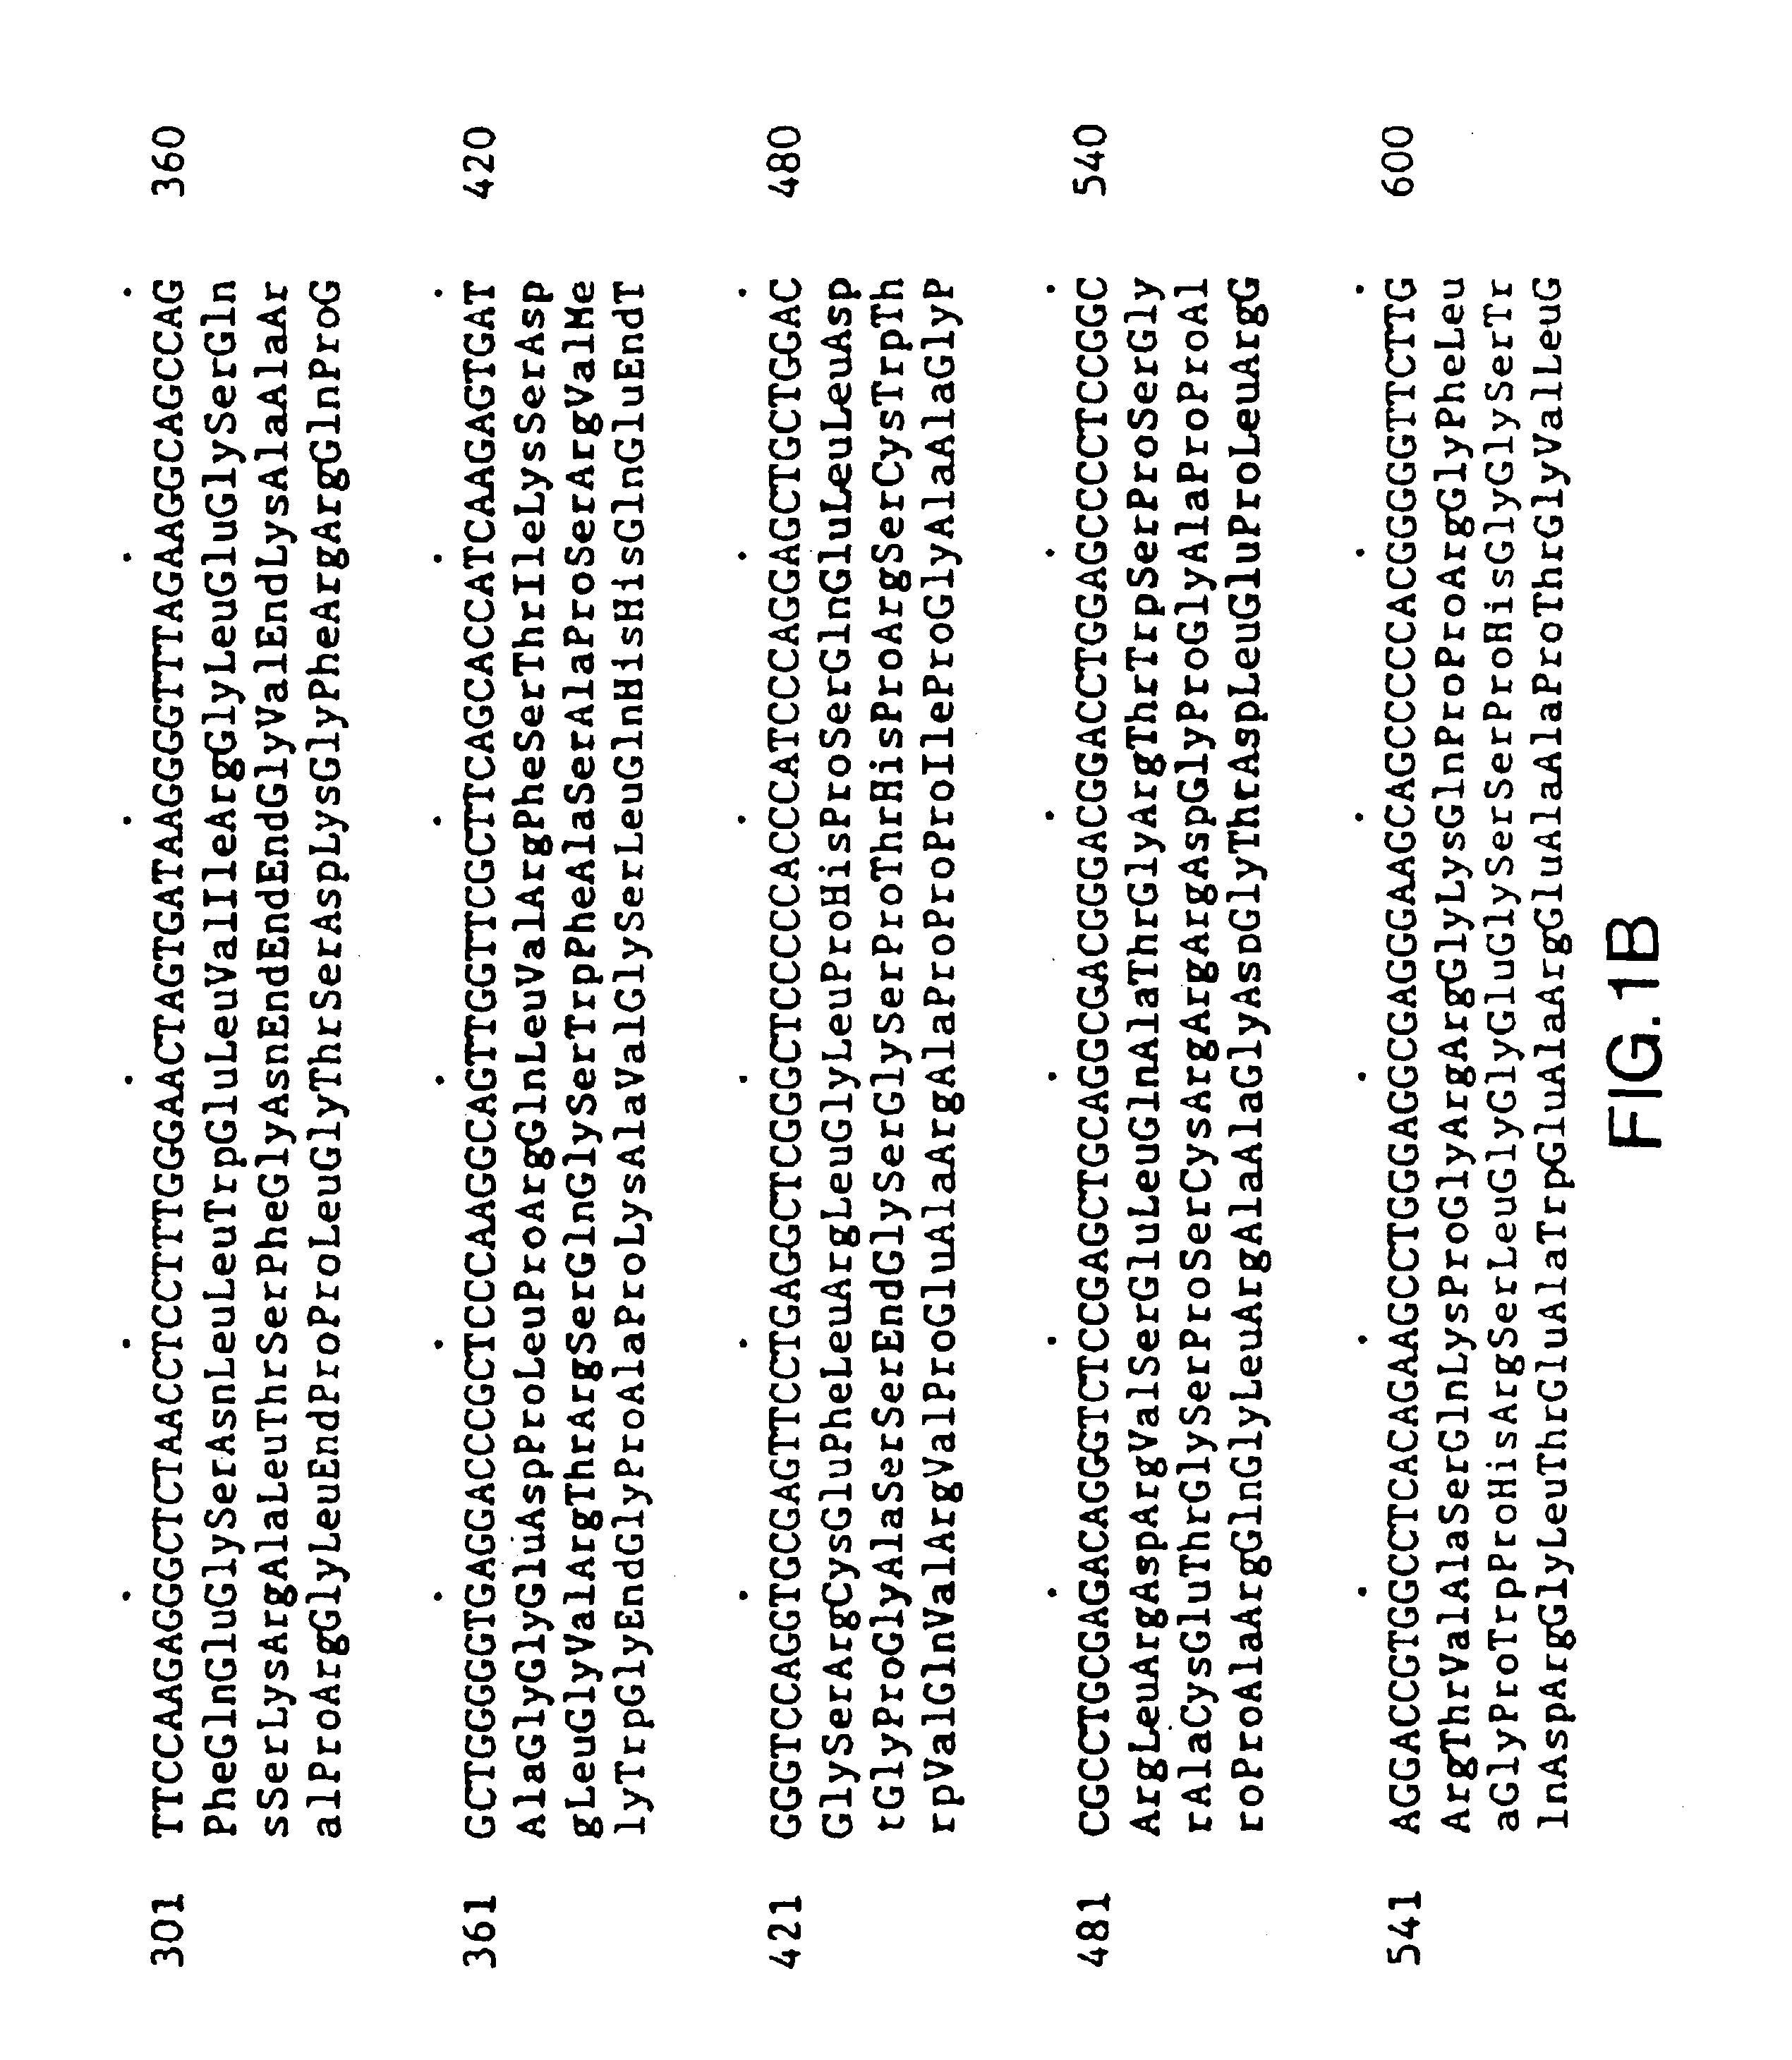 Pharmaceutical compositions and methods using natriuretic peptides